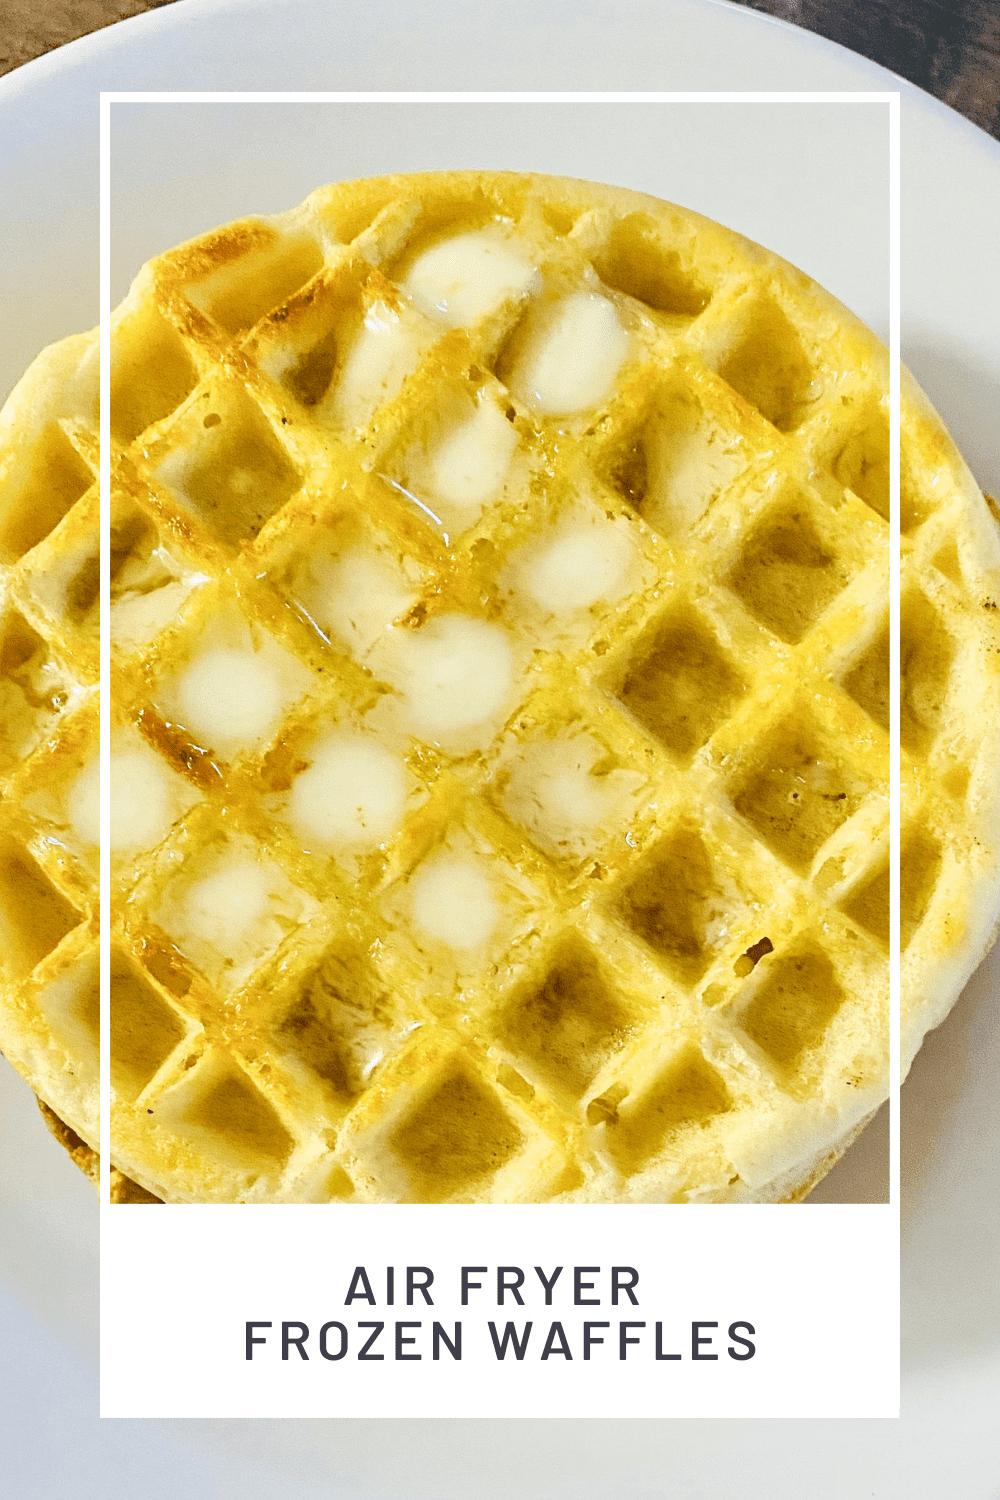 stacked waffles with butter plated and ready to eat